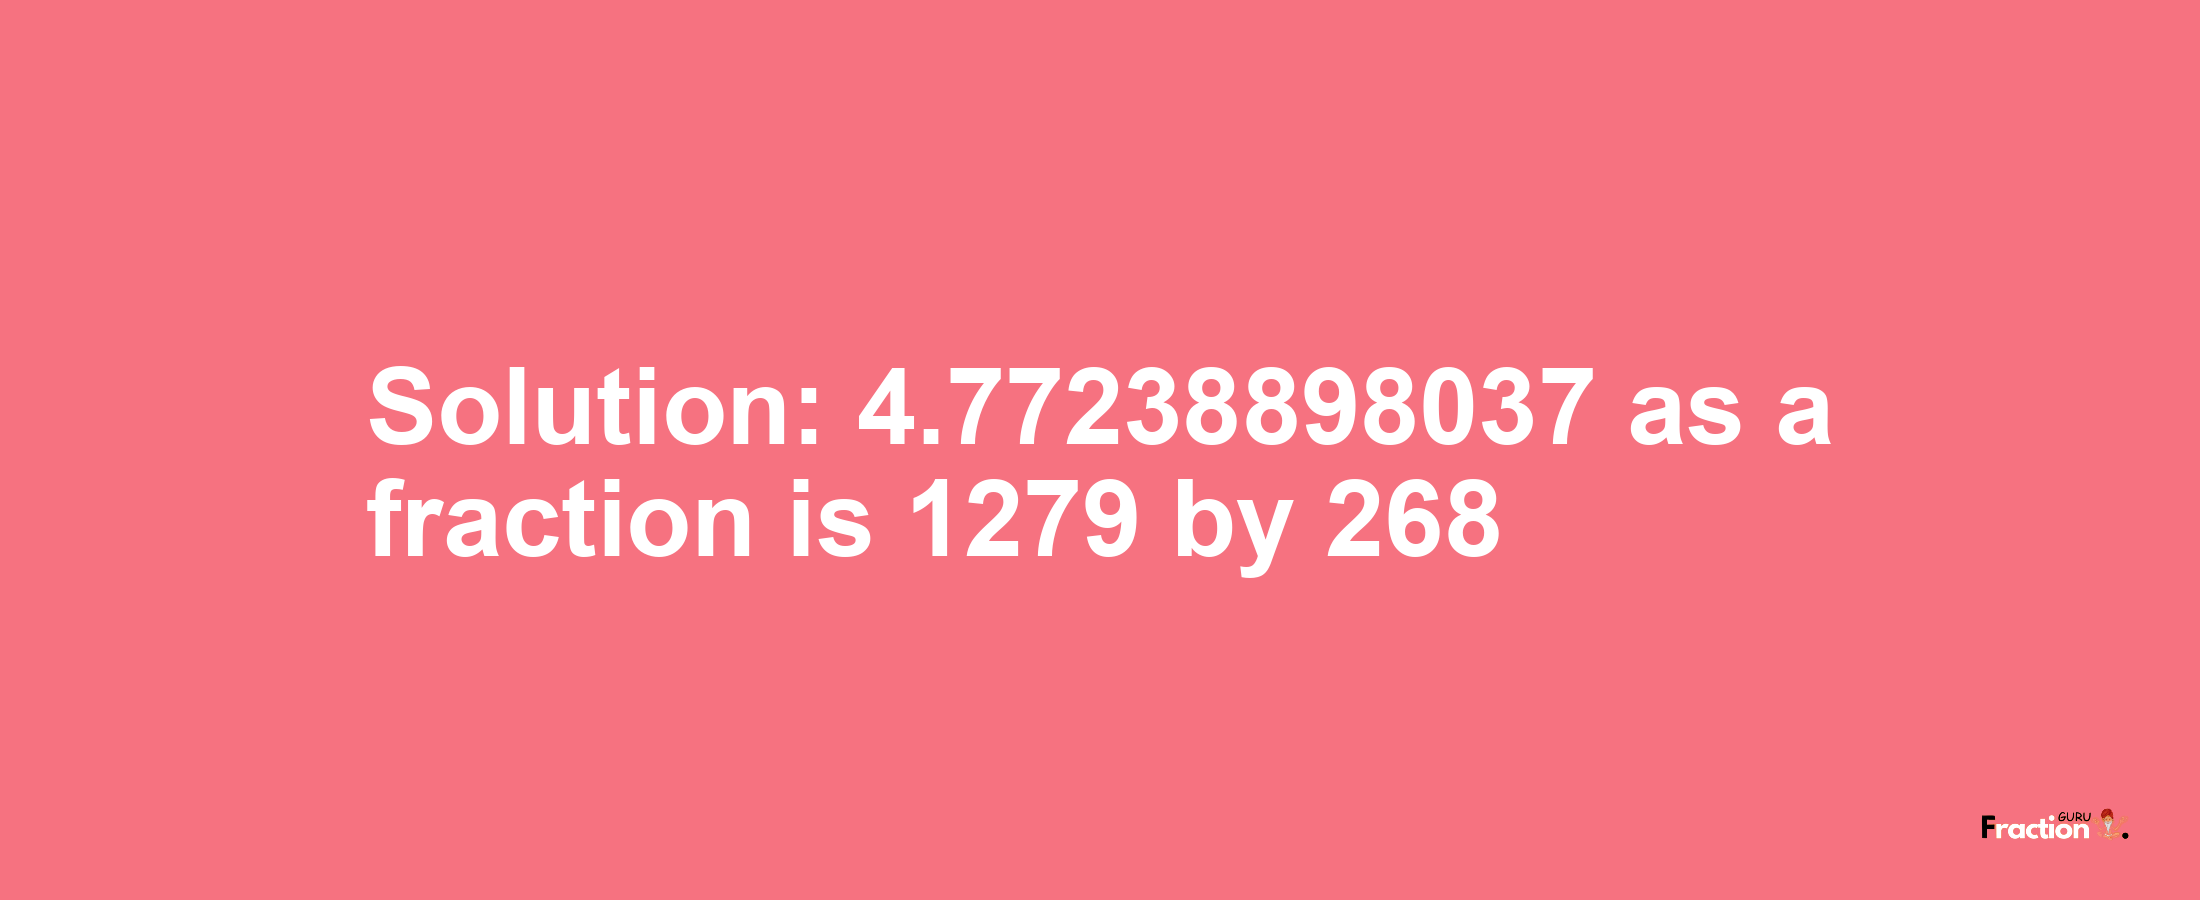 Solution:4.77238898037 as a fraction is 1279/268